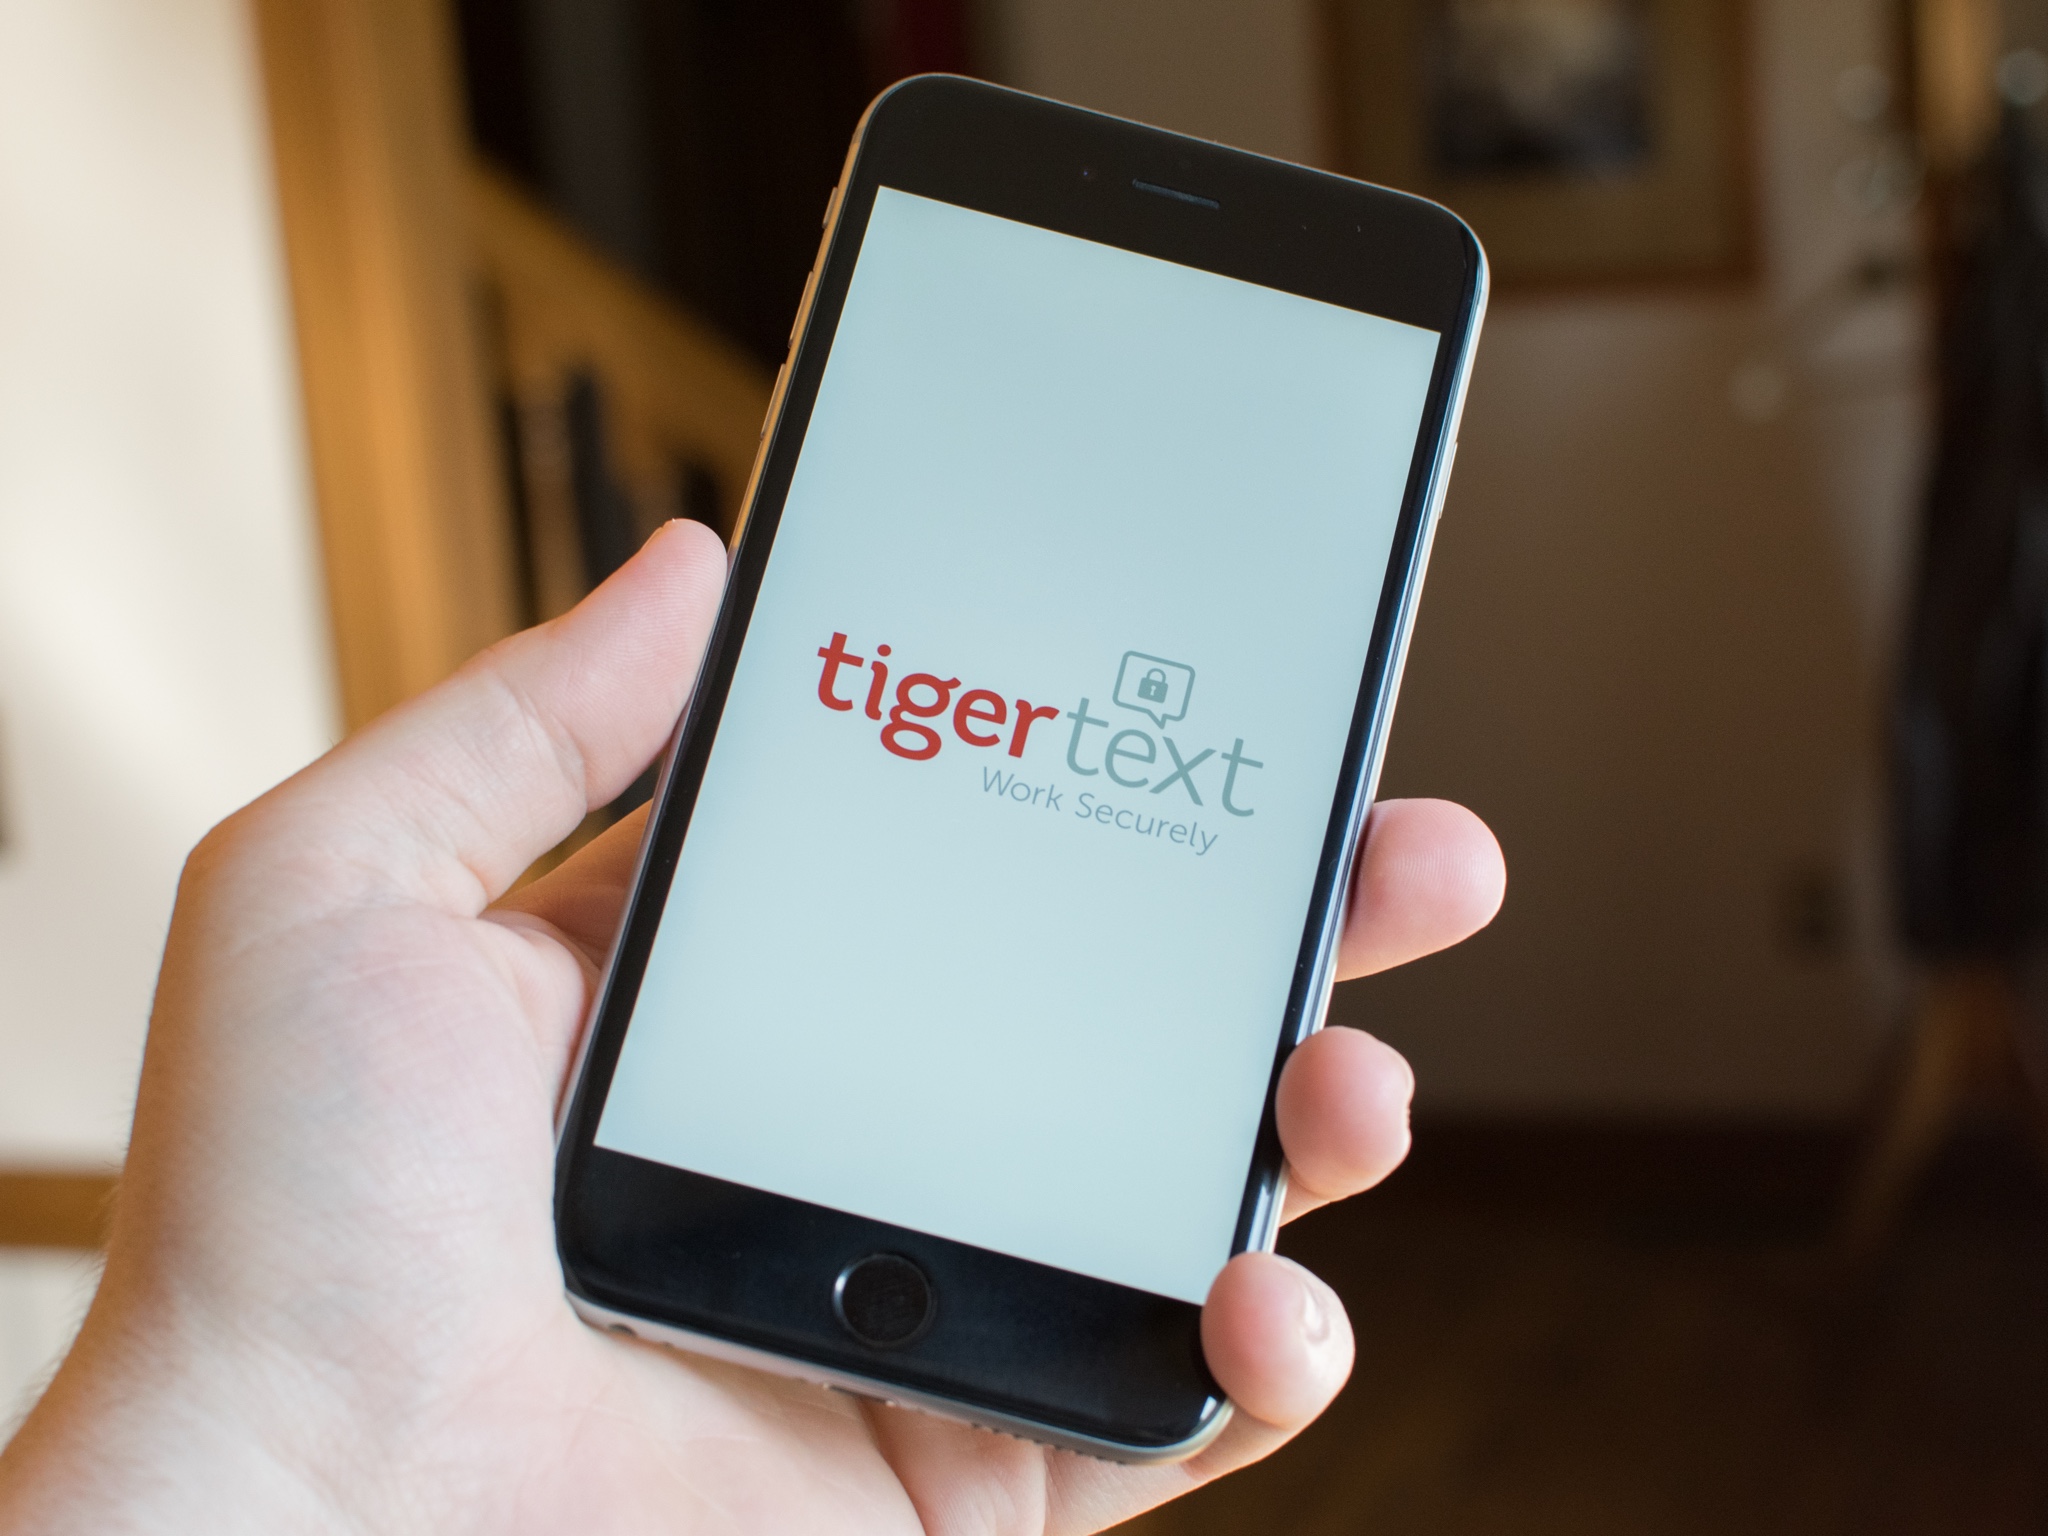 U.S. Cellular embraces secure messaging with TigerText partnership